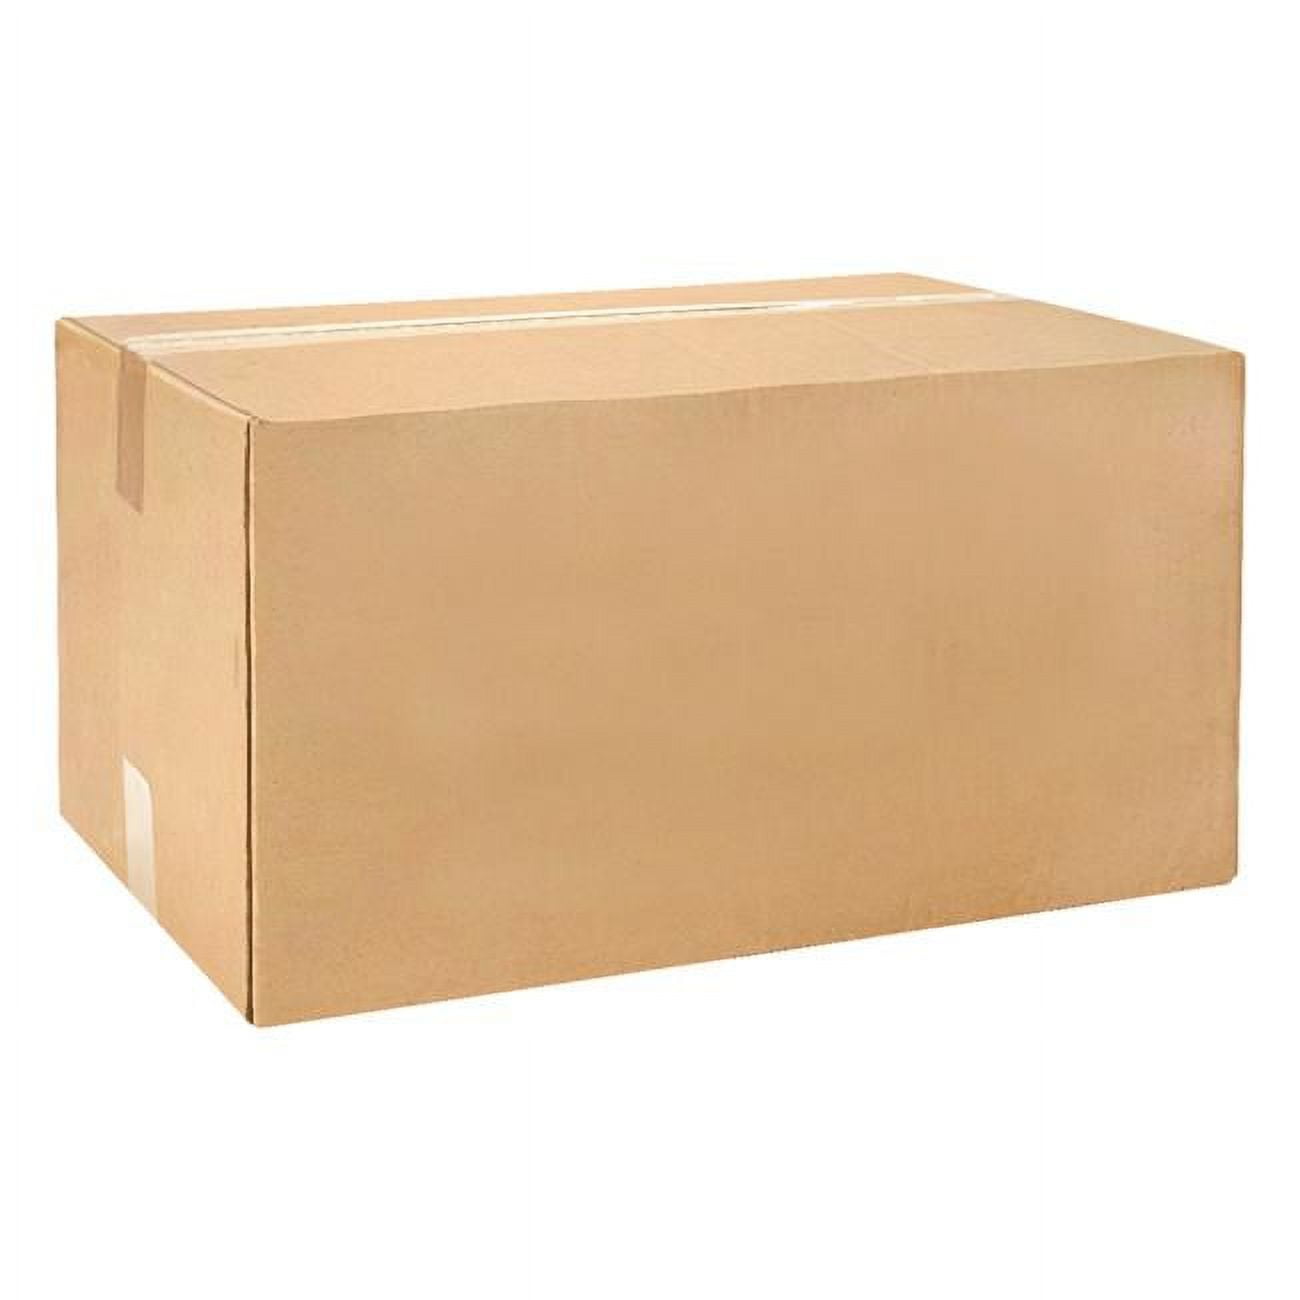 9330911 18 x 18 x 18 in. Cardboard Moving Box - Pack of 10 -  BOXES ON WHEELS